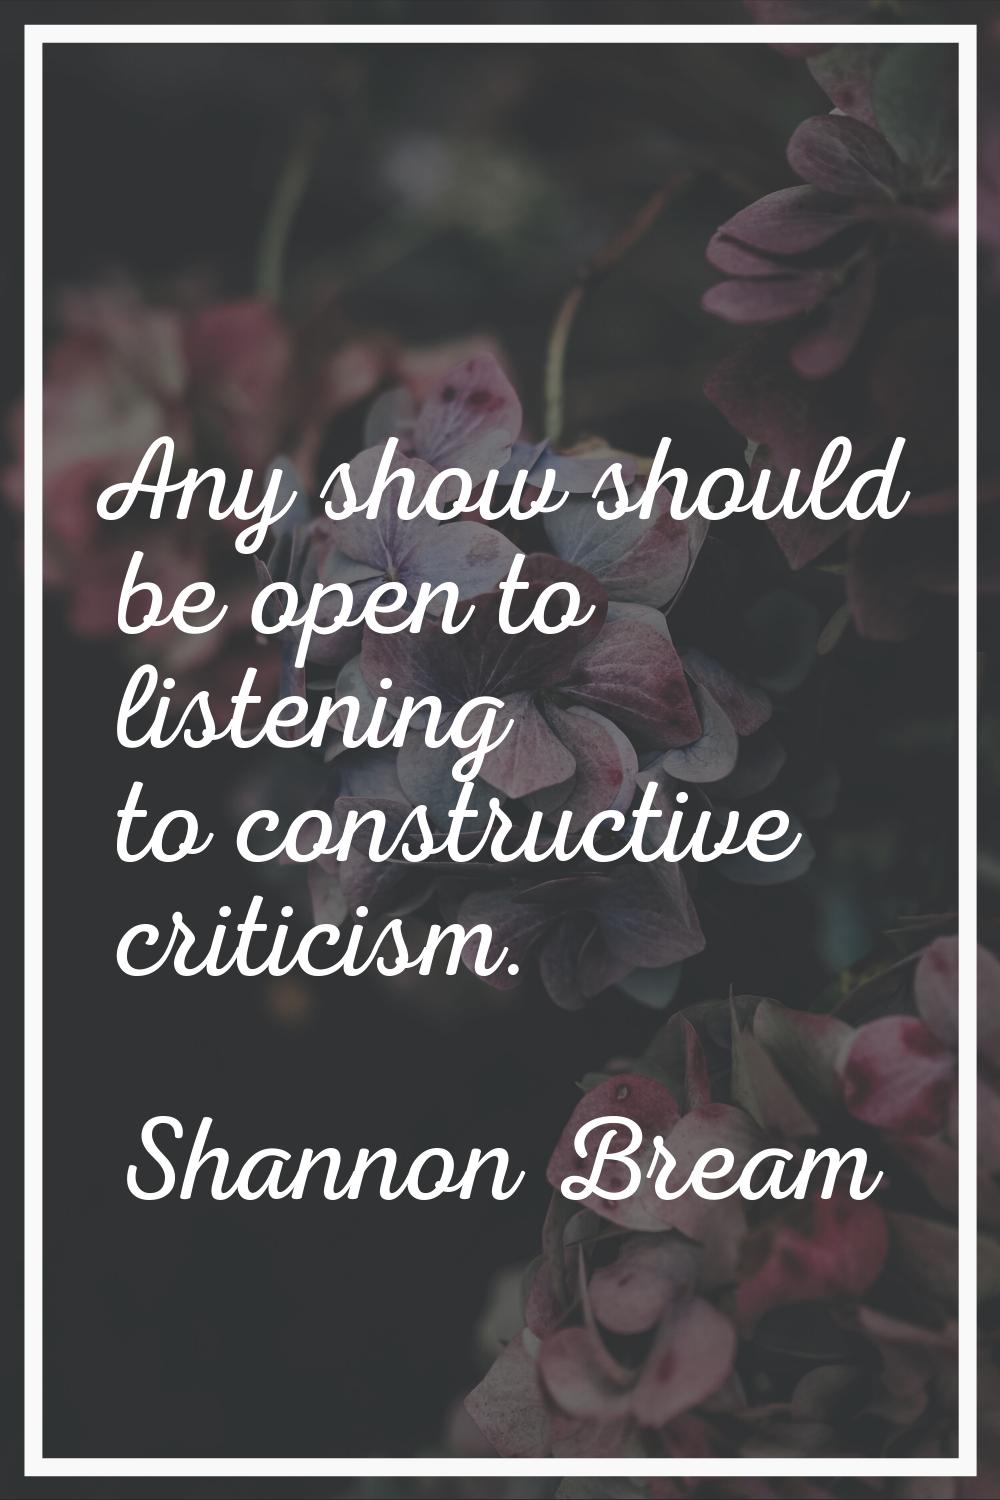 Any show should be open to listening to constructive criticism.